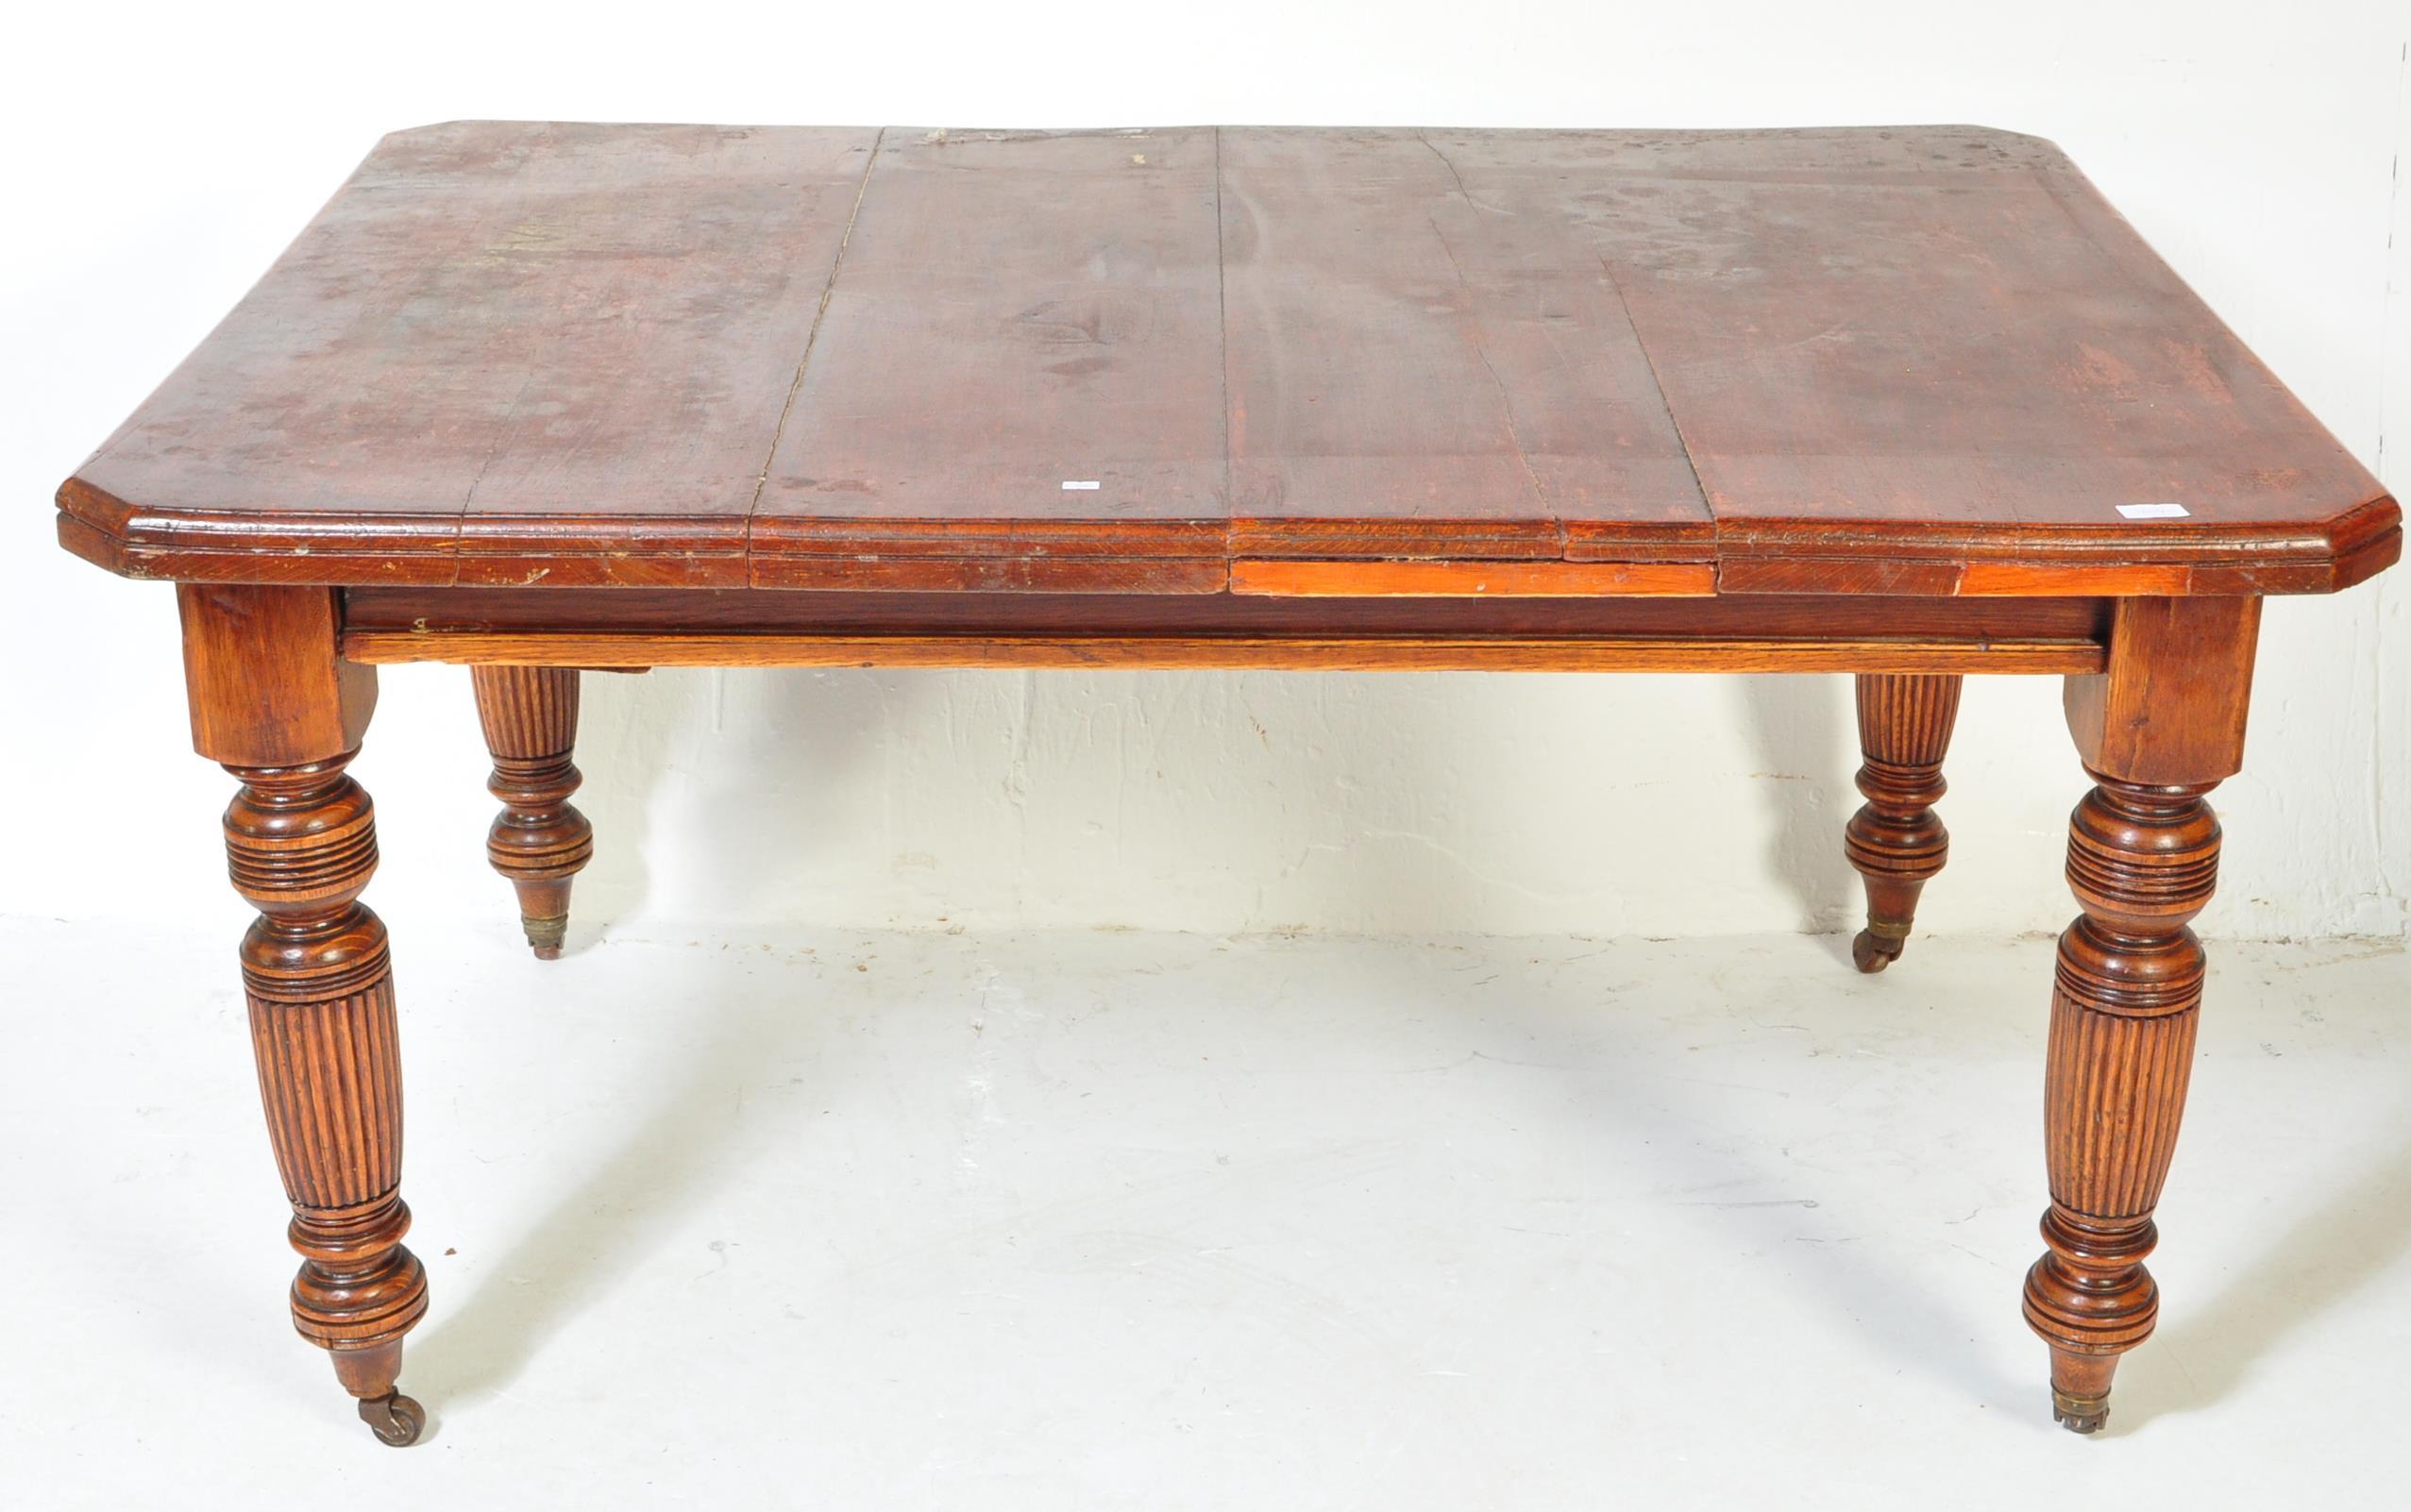 VICTORIAN 19TH CENTURY VICTORIAN FARMHOUSE DINING TABLE - Image 2 of 5